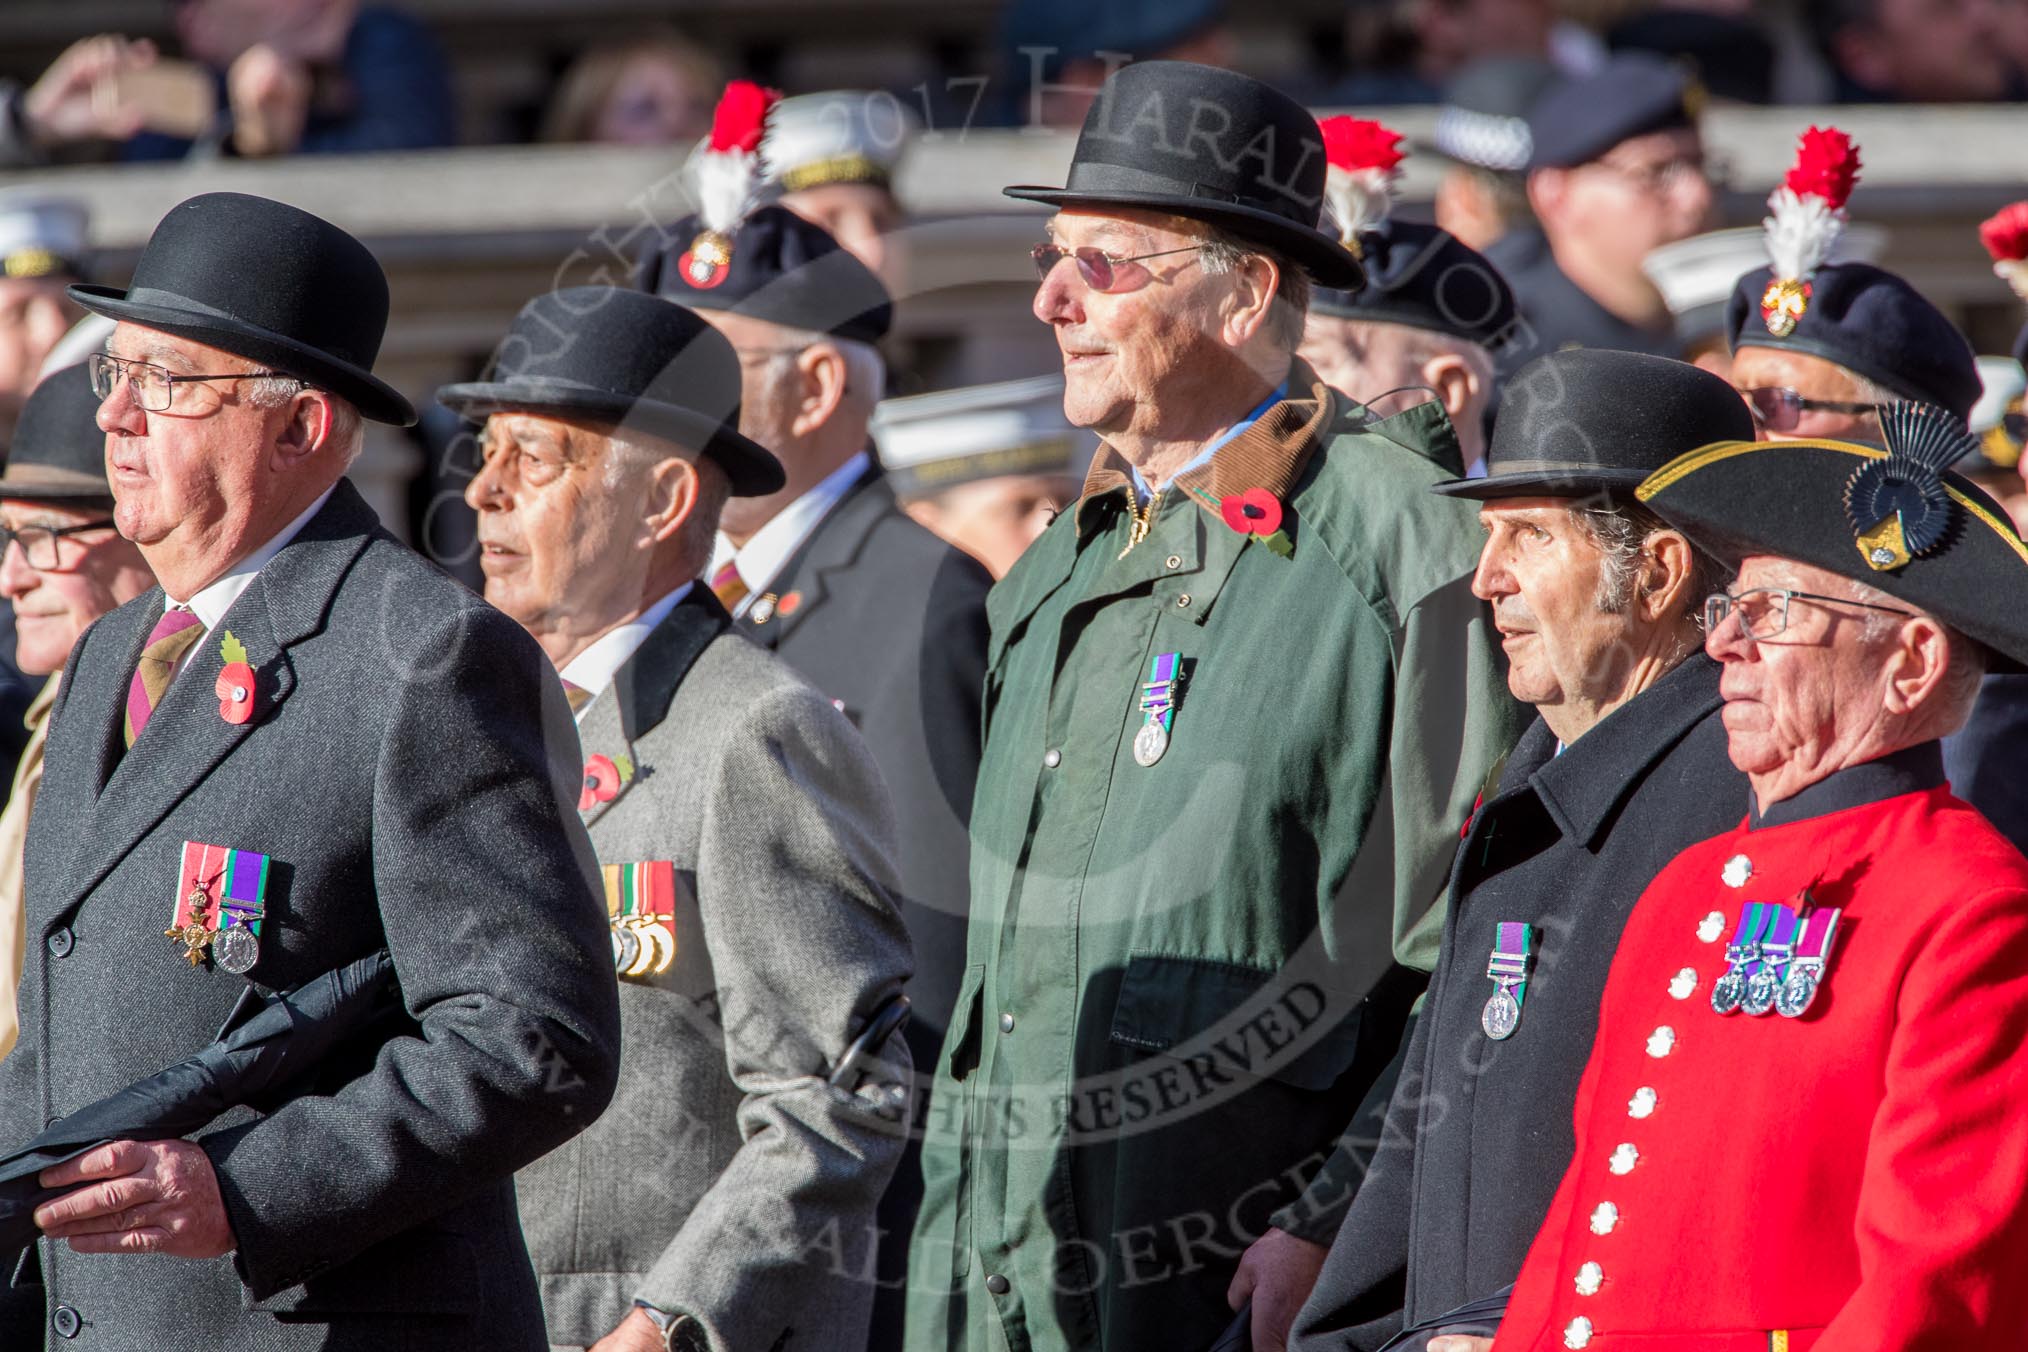 The Northumberland Fusiliers All Ranks Club (Group A34, 41 members) during the Royal British Legion March Past on Remembrance Sunday at the Cenotaph, Whitehall, Westminster, London, 11 November 2018, 12:02.